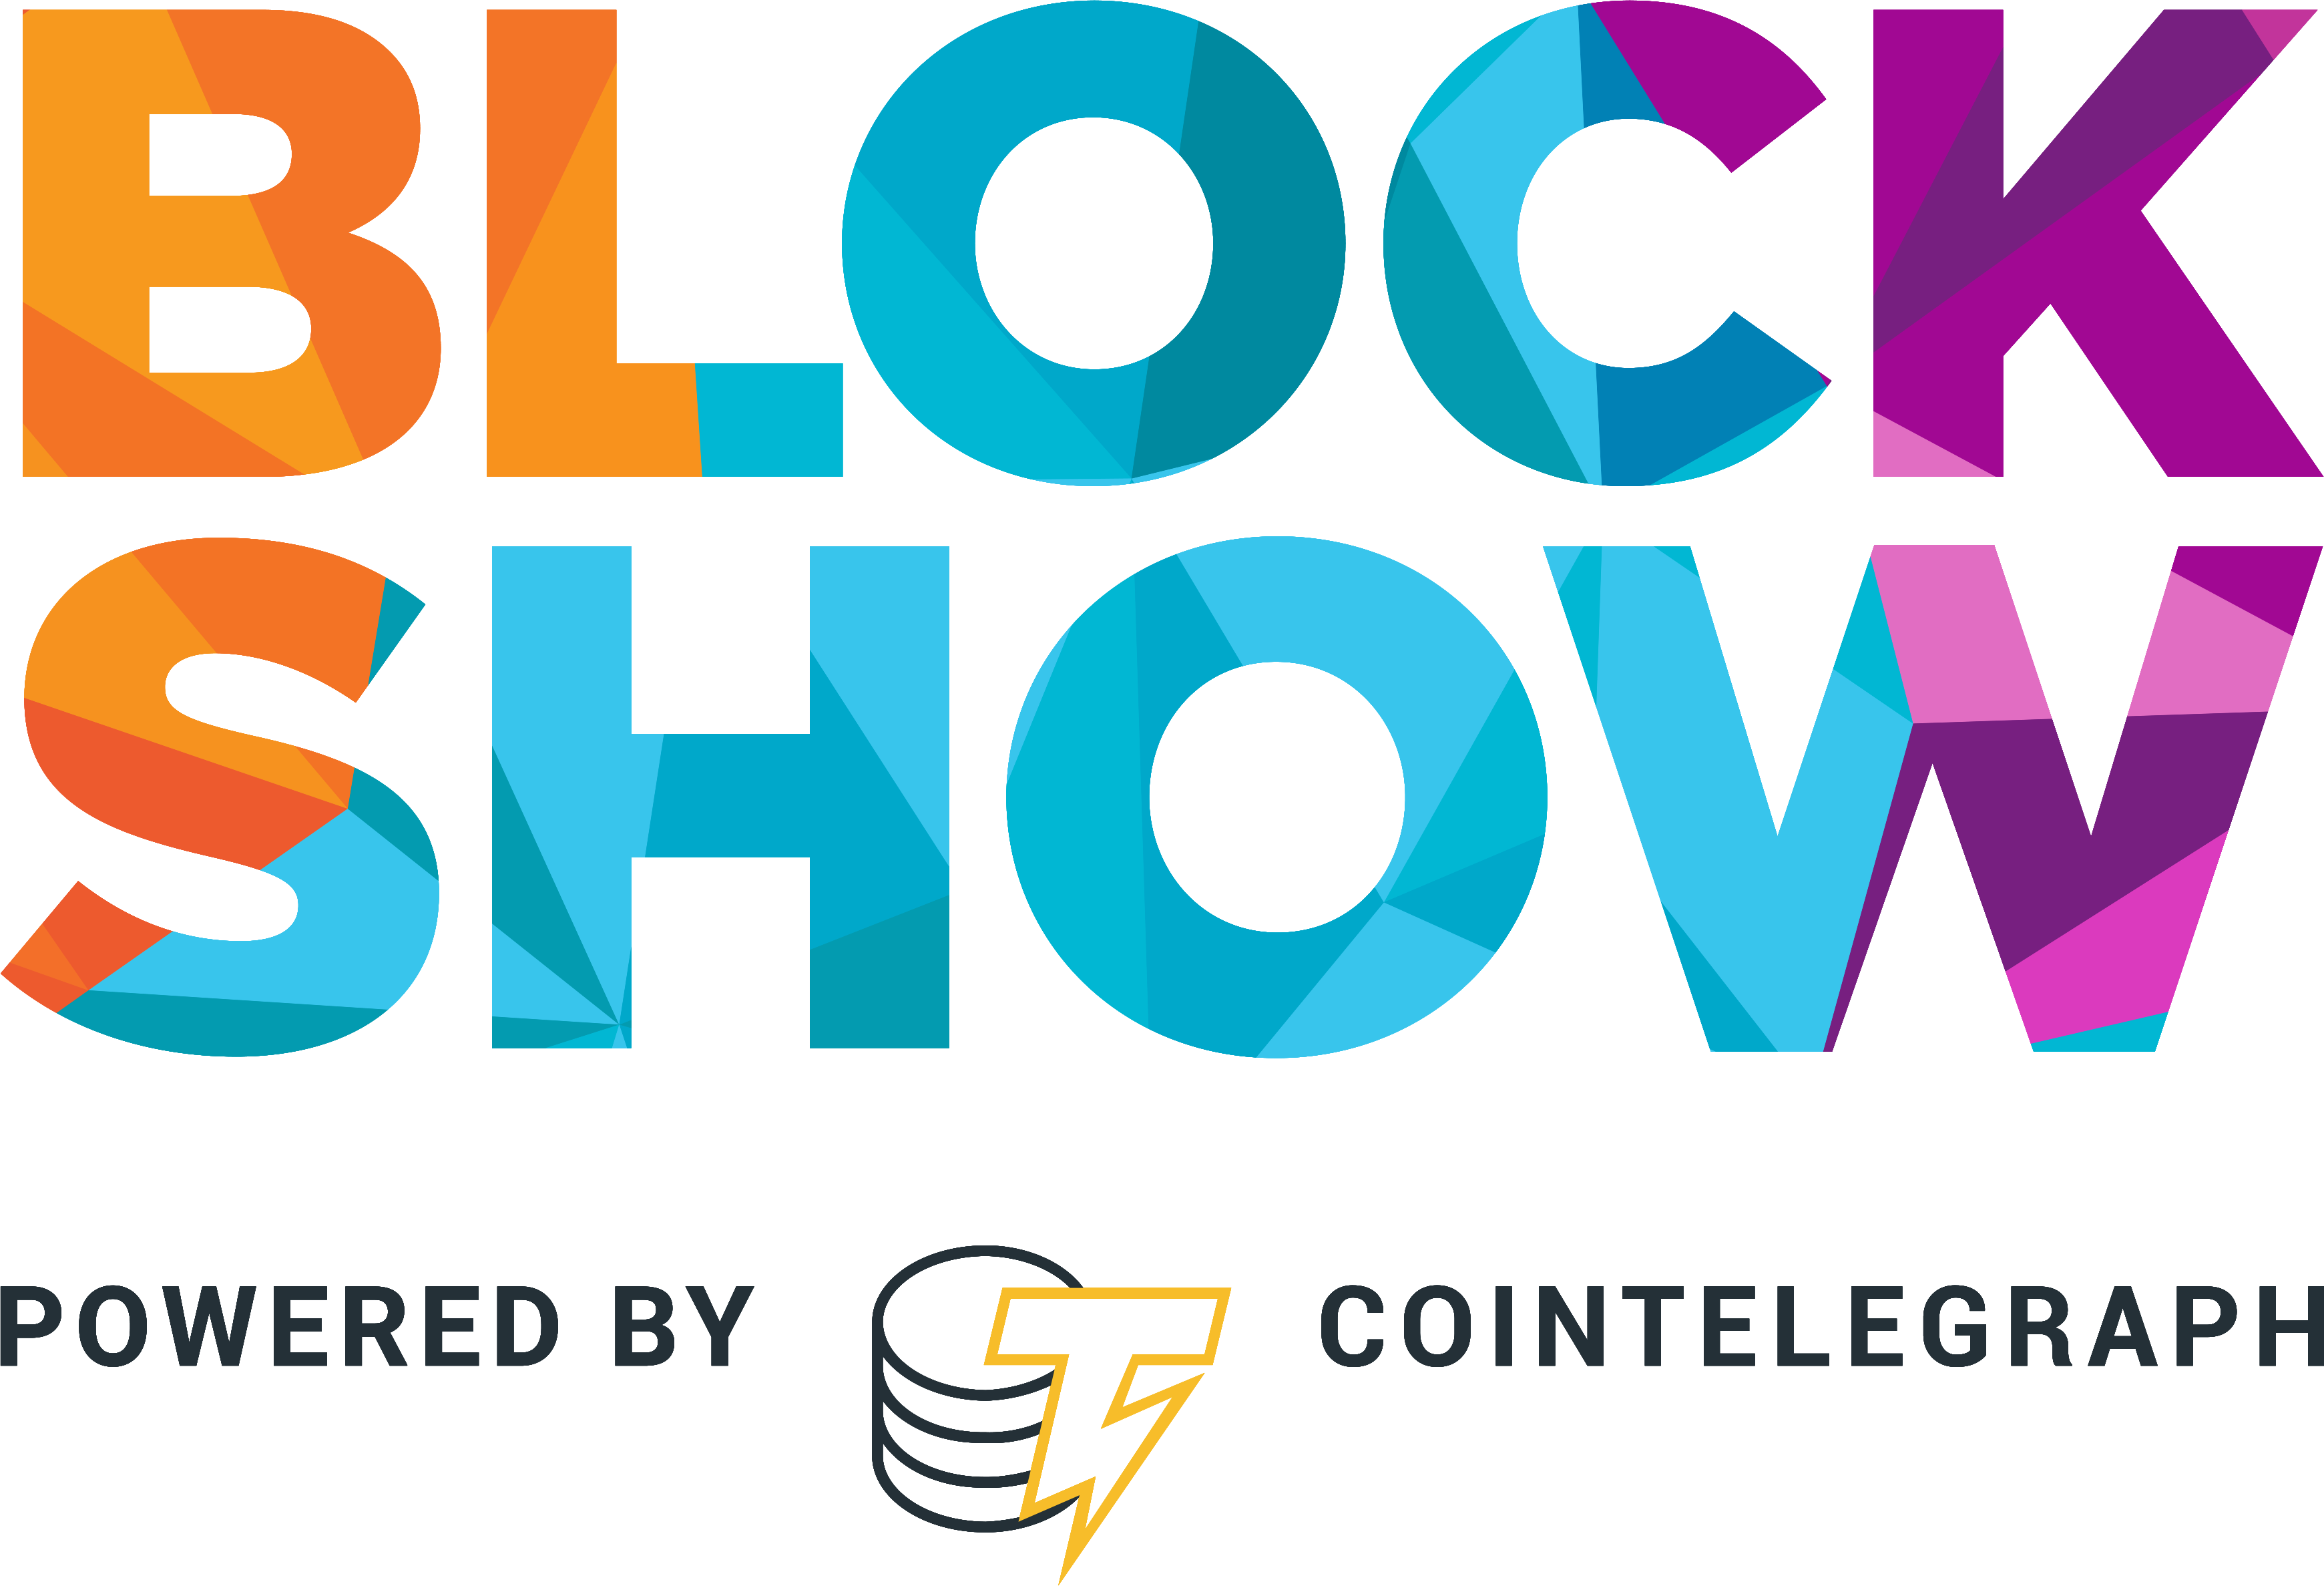 Invitation to BlockShow Medialogue (moderated by Cointelegraph)